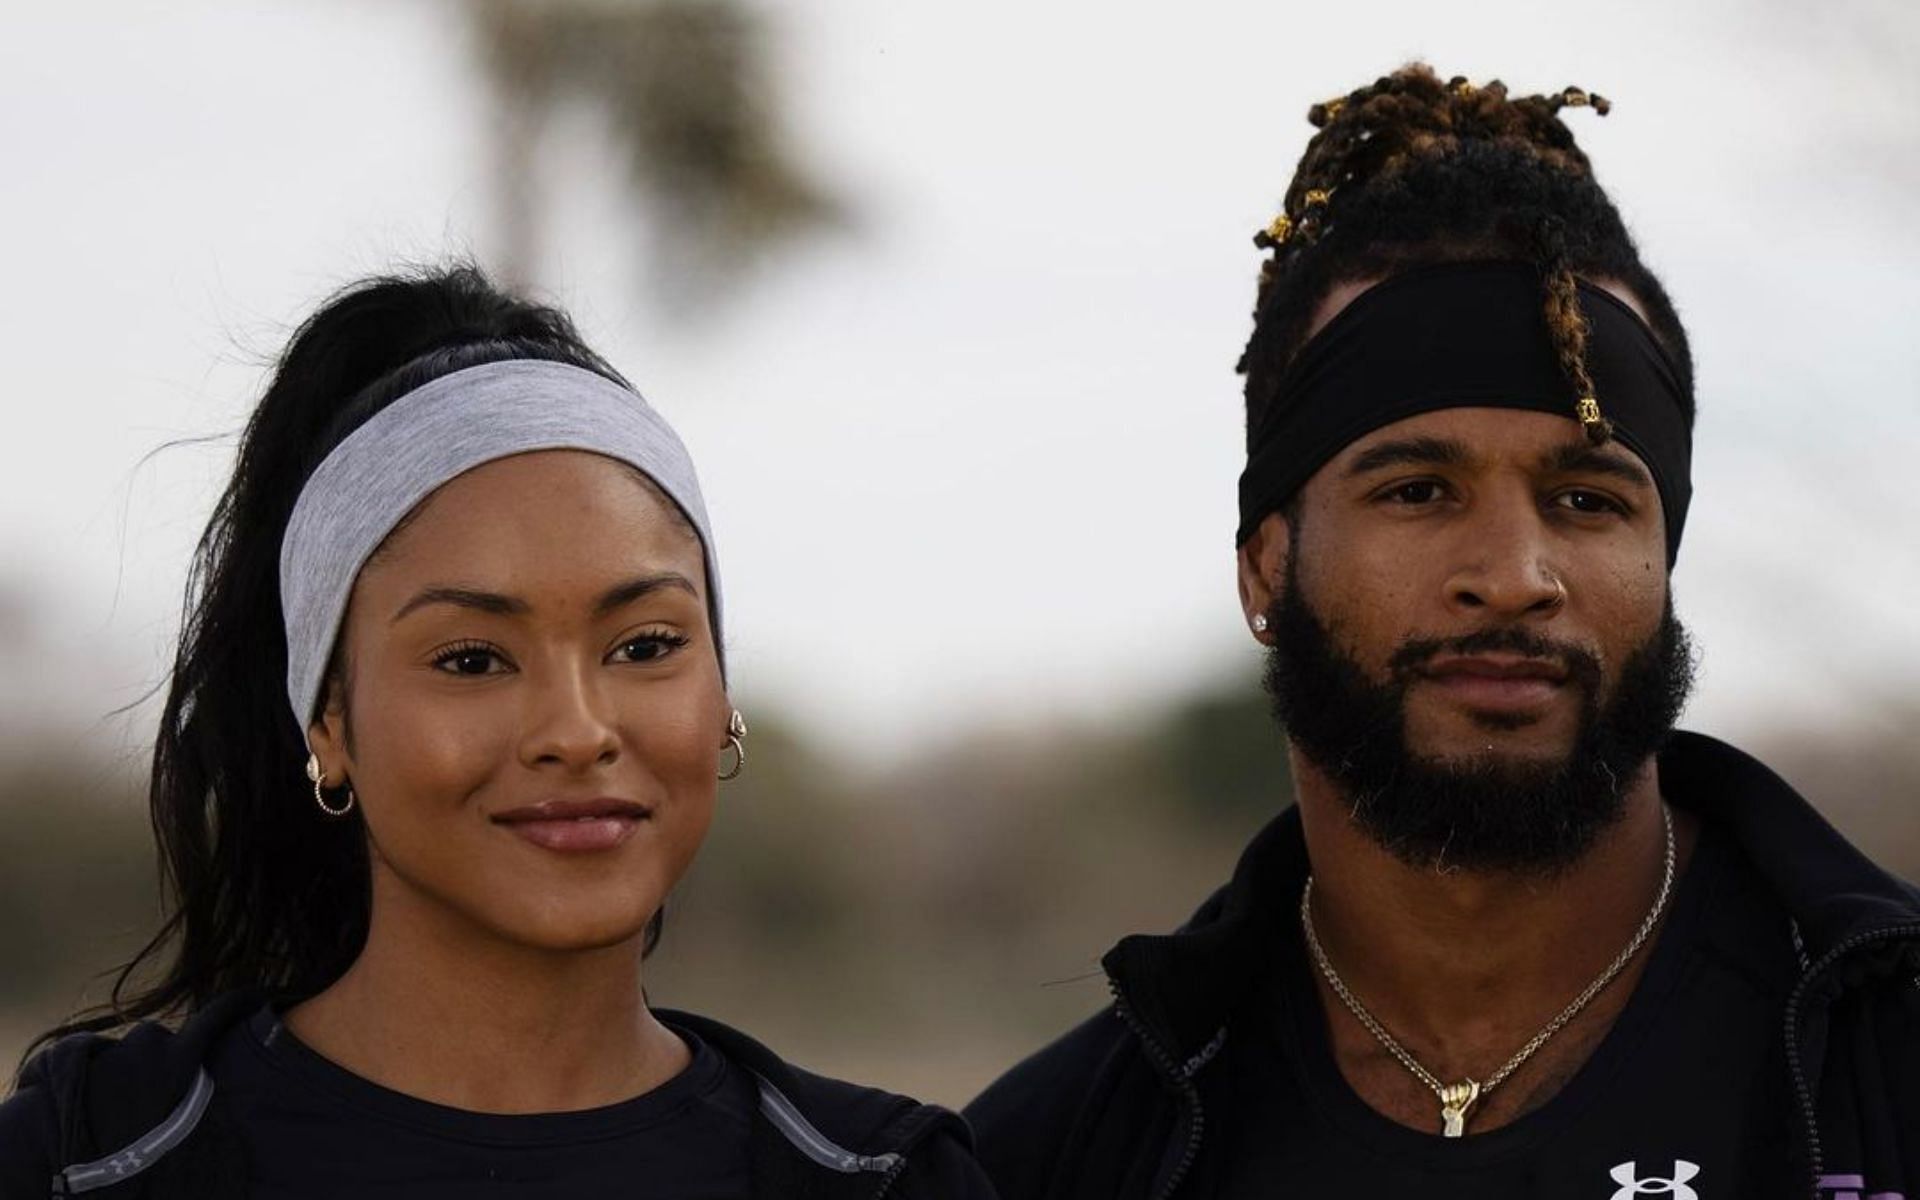 The Challenge's Nurys Mateo shares why she unfollowed her friend